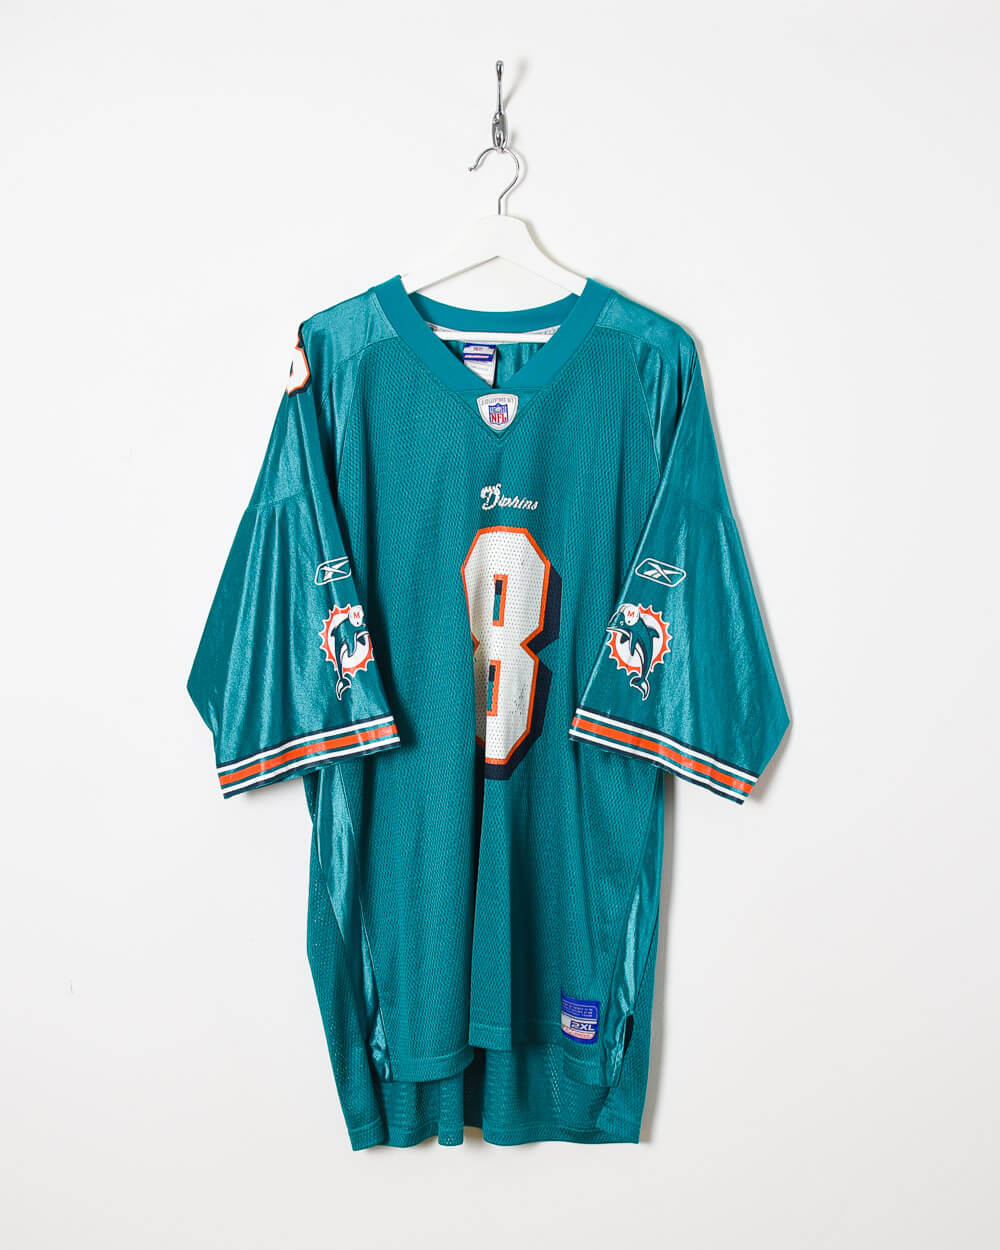 Reebok Miami Dolphins NFL Jersey - XX-Large - Domno Vintage 90s, 80s, 00s Retro and Vintage Clothing 